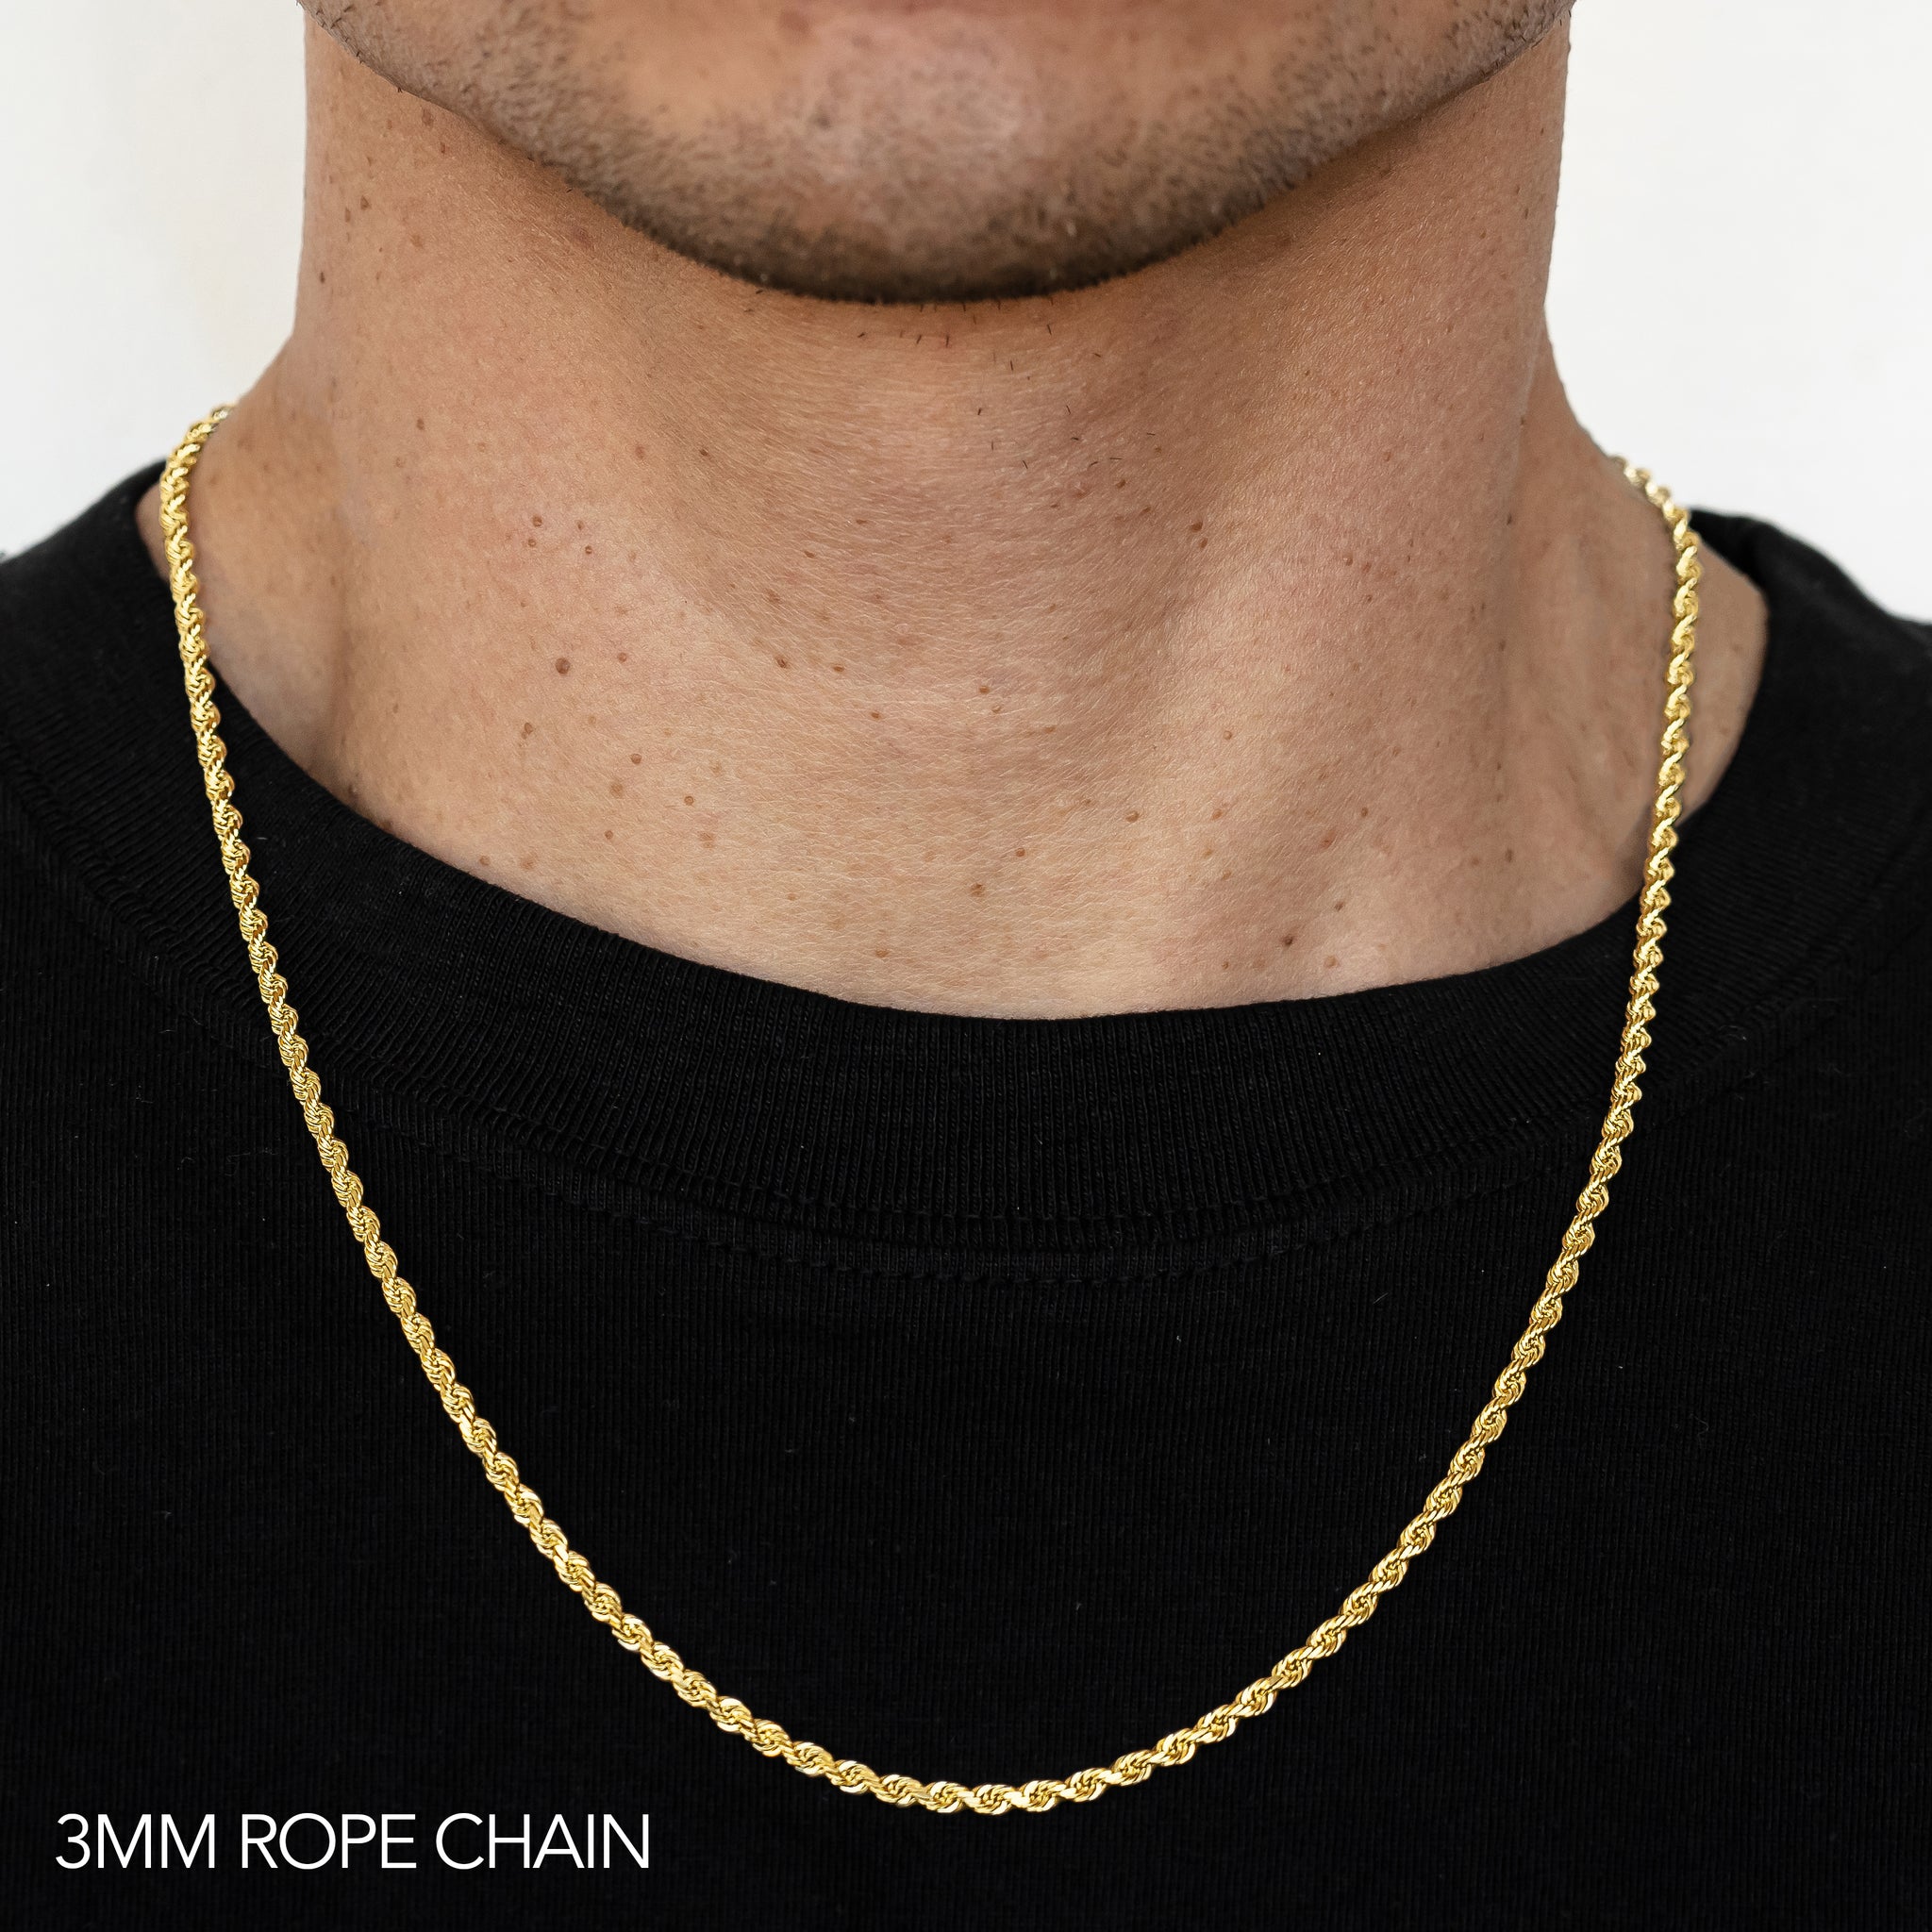 18K 3MM YELLOW GOLD SOLID DC ROPE 16" CHAIN NECKLACE (AVAILABLE IN LENGTHS 7" - 30")